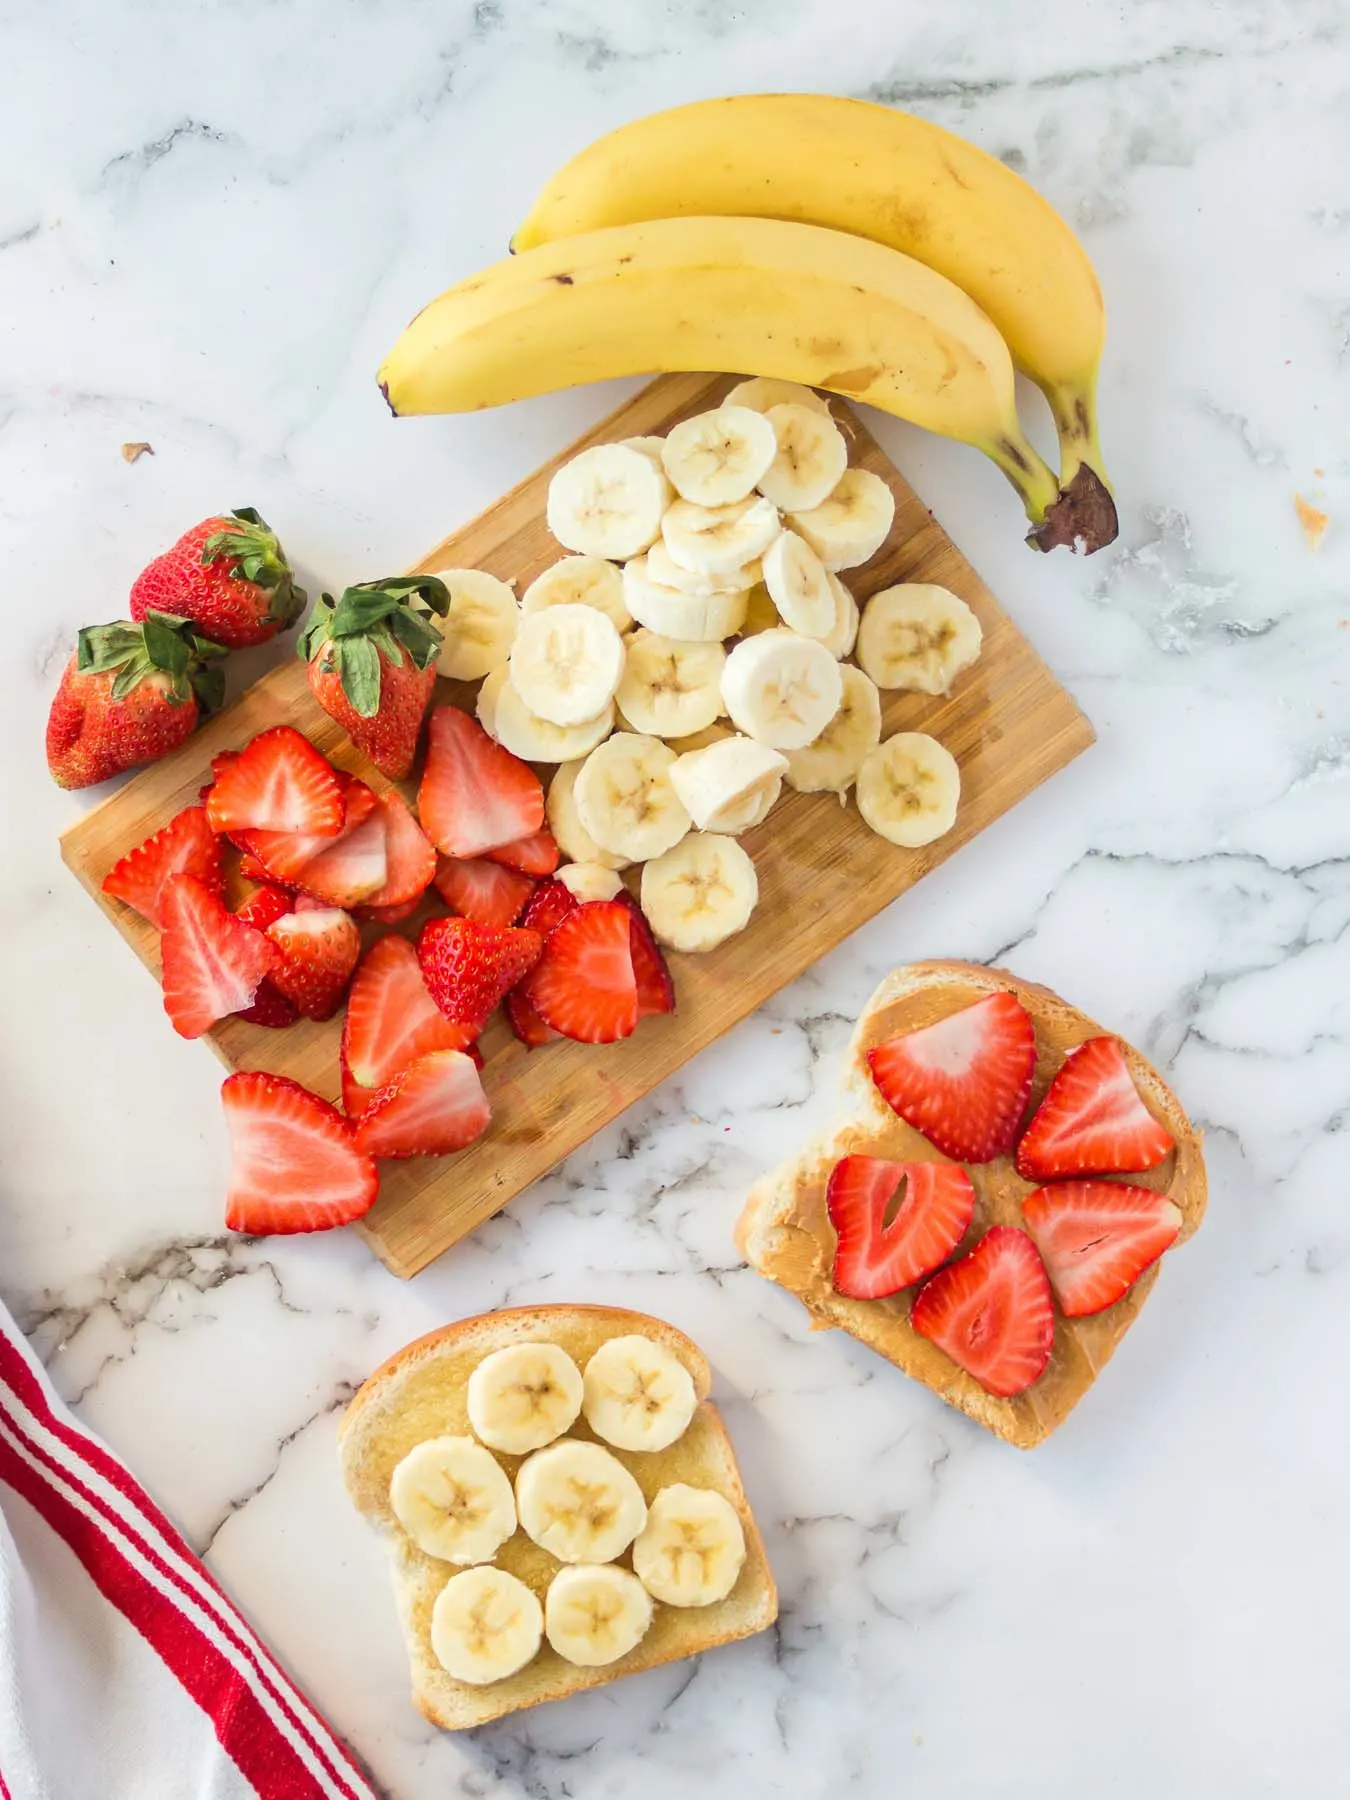 Peanut butter sandwich halves with banana slices and strawberry slices.